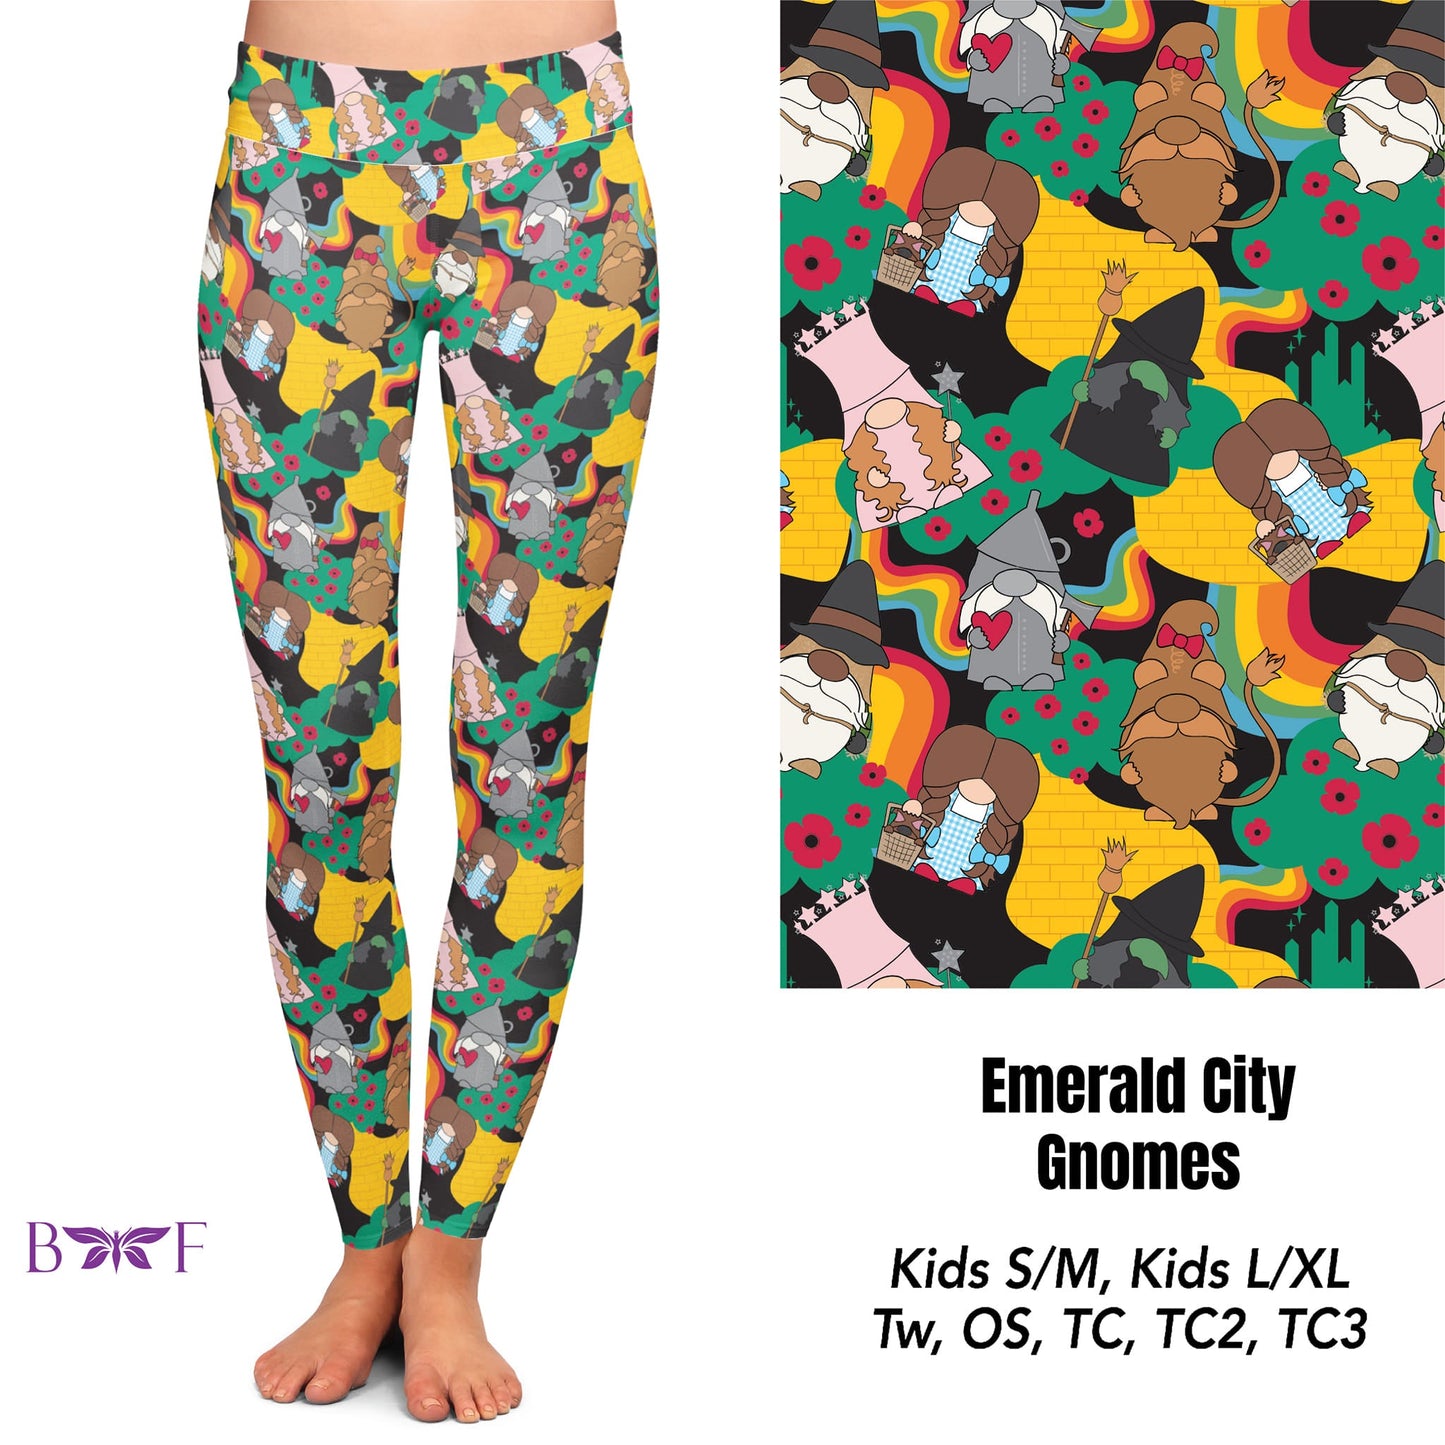 Emerald City Gnomes Leggings with pockets